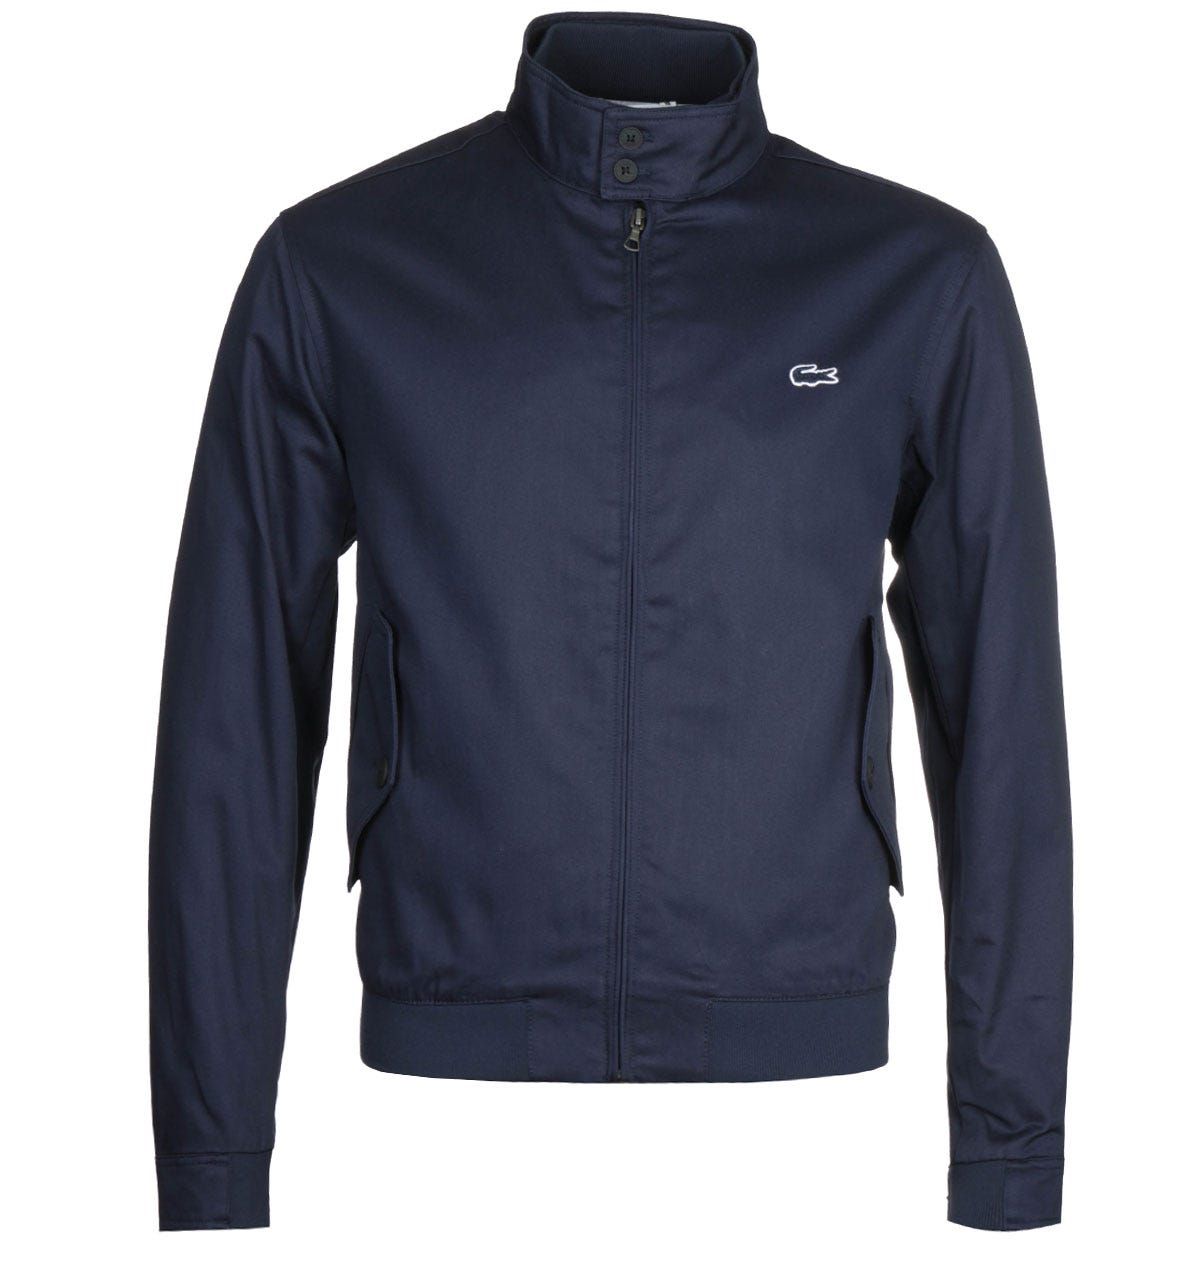 <p>A classic silhouette crafted by Lacoste. The Lacoste Lightweight Navy Zip Jacket is fitted with a full zip fastening, alongside a button collar for extra support in comfort. The jacket offers a layer of comfort and protection against all elements. The design is finished with the Lacoste logo embroidered on the chest.</p><ul><li>Cotton composition</li><li>Button collar</li><li>Zip fastening</li><li>Lacoste logo embroidered on chest</li></ul><p>Style & Fit:</p><ul><li>Regular fit</li><li>Fits true to size</li></ul><p>Fabric Composition & Care:</p><ul><li>100% Cotton</li><li>Machine wash</li></ul>